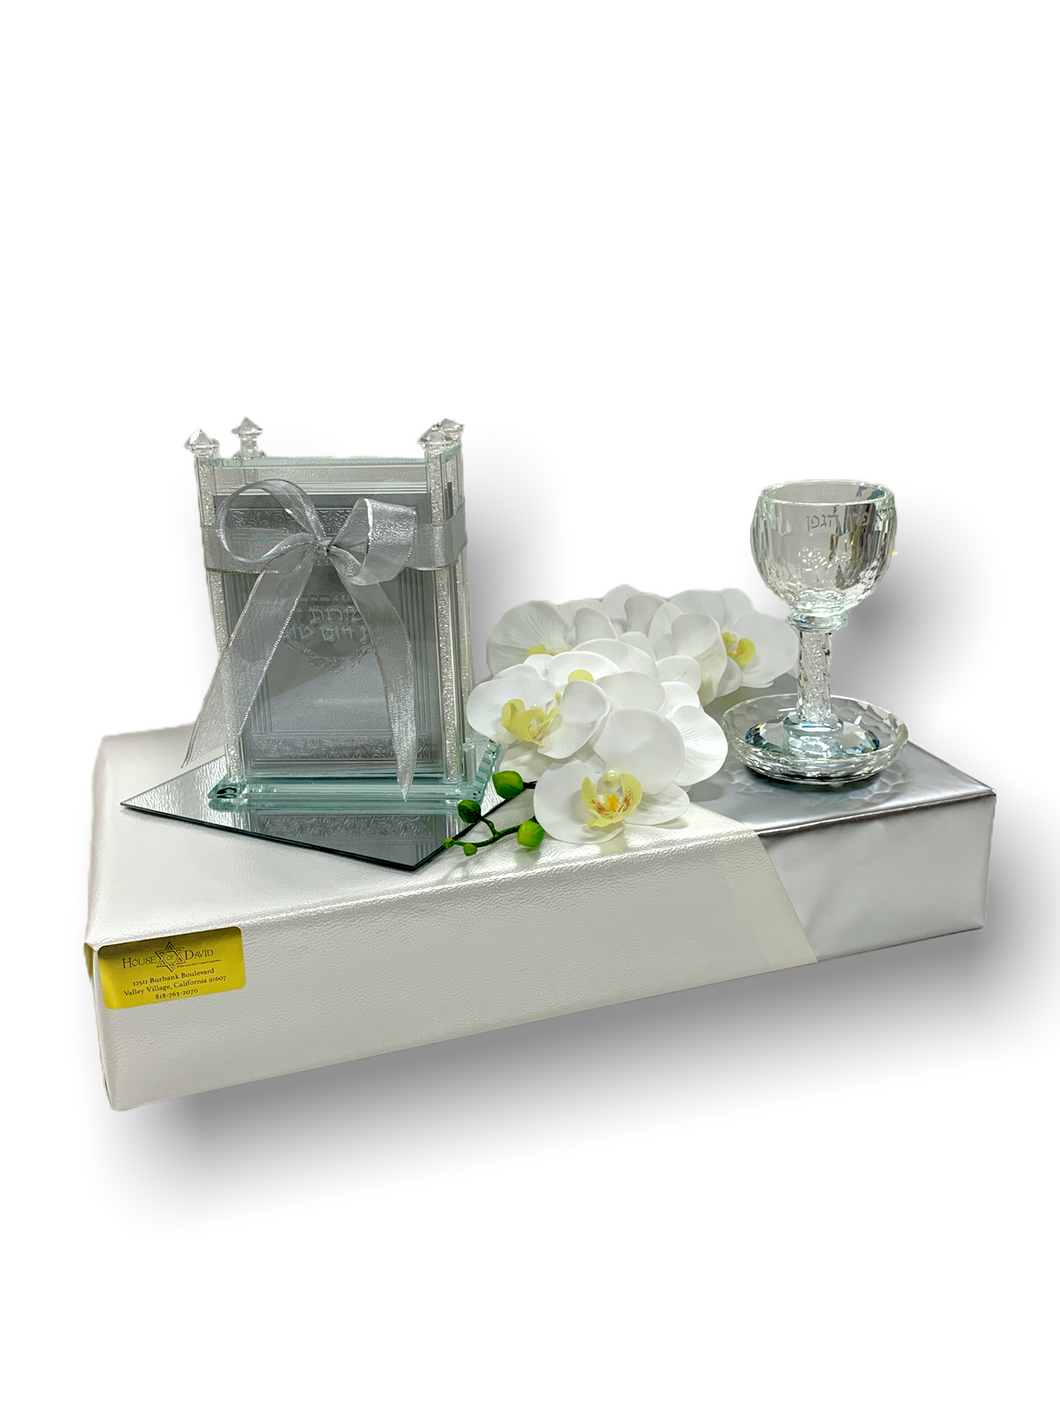 The Crystal Gift Set